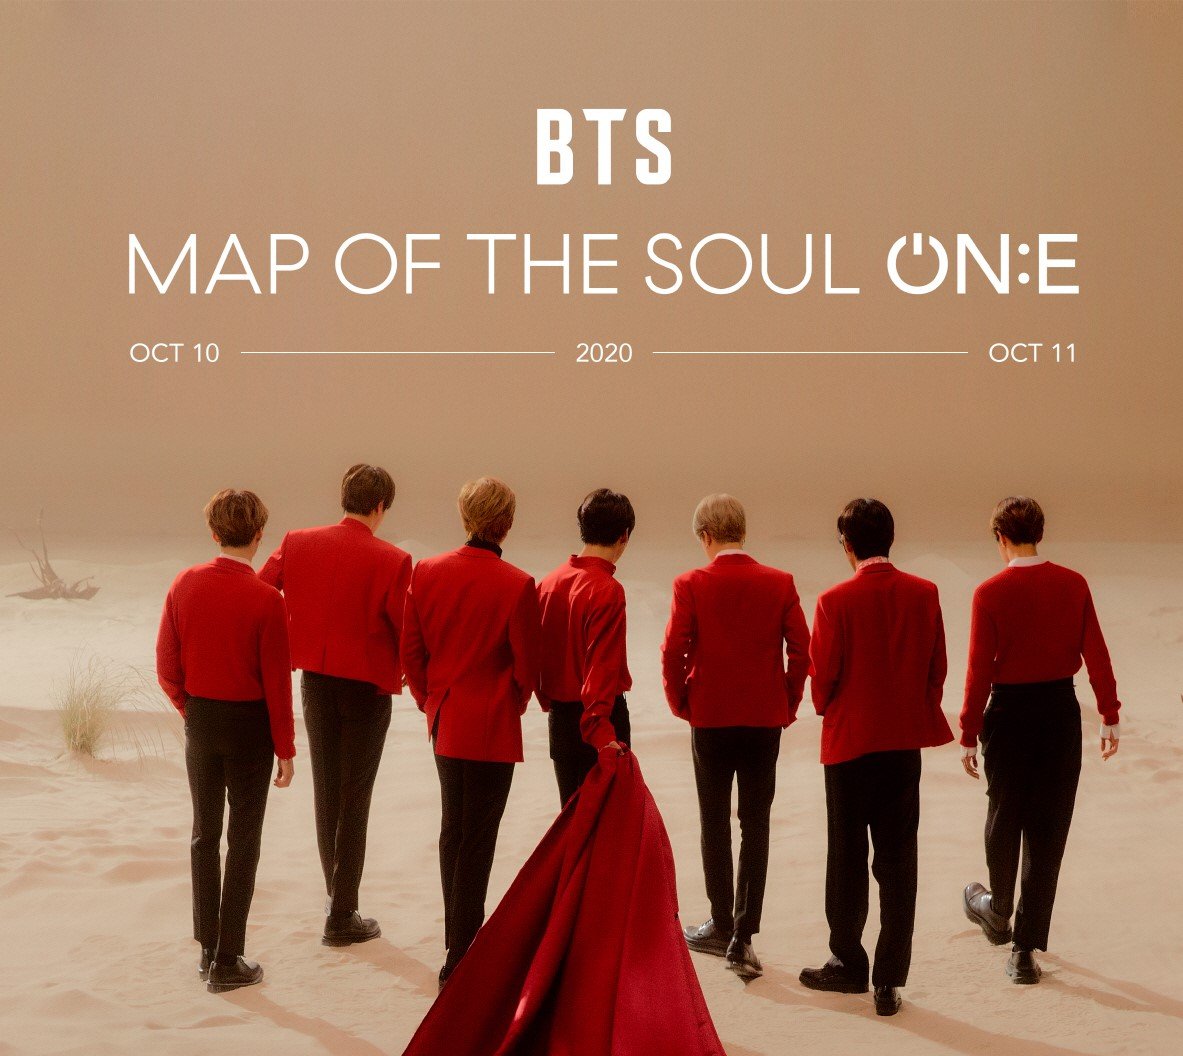 How to Watch BTS' 'Map of the Soul ON:E' Concert